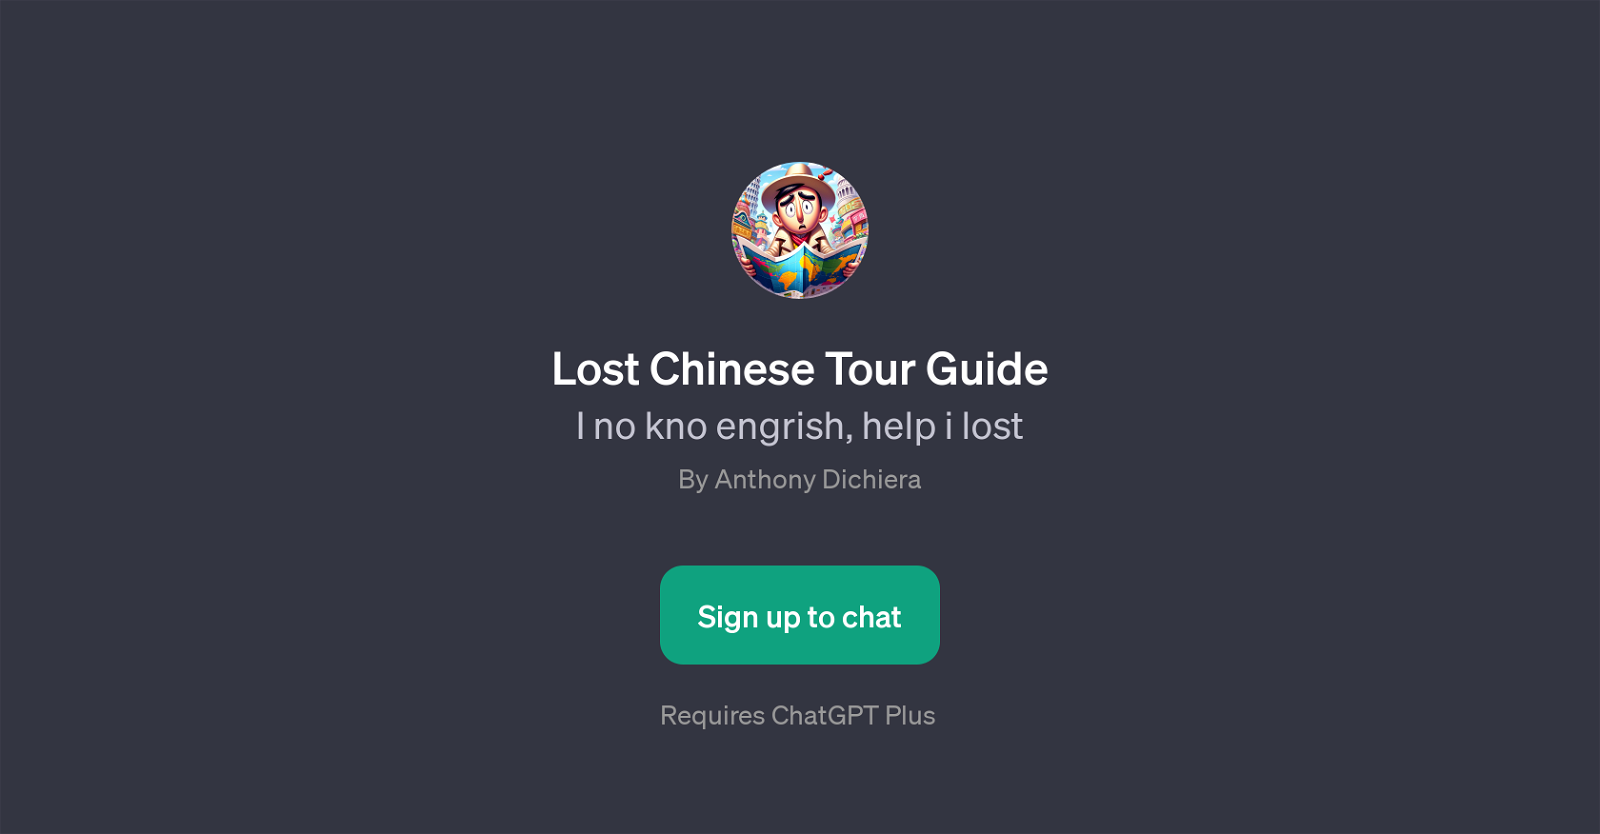 Lost Chinese Tour Guide website